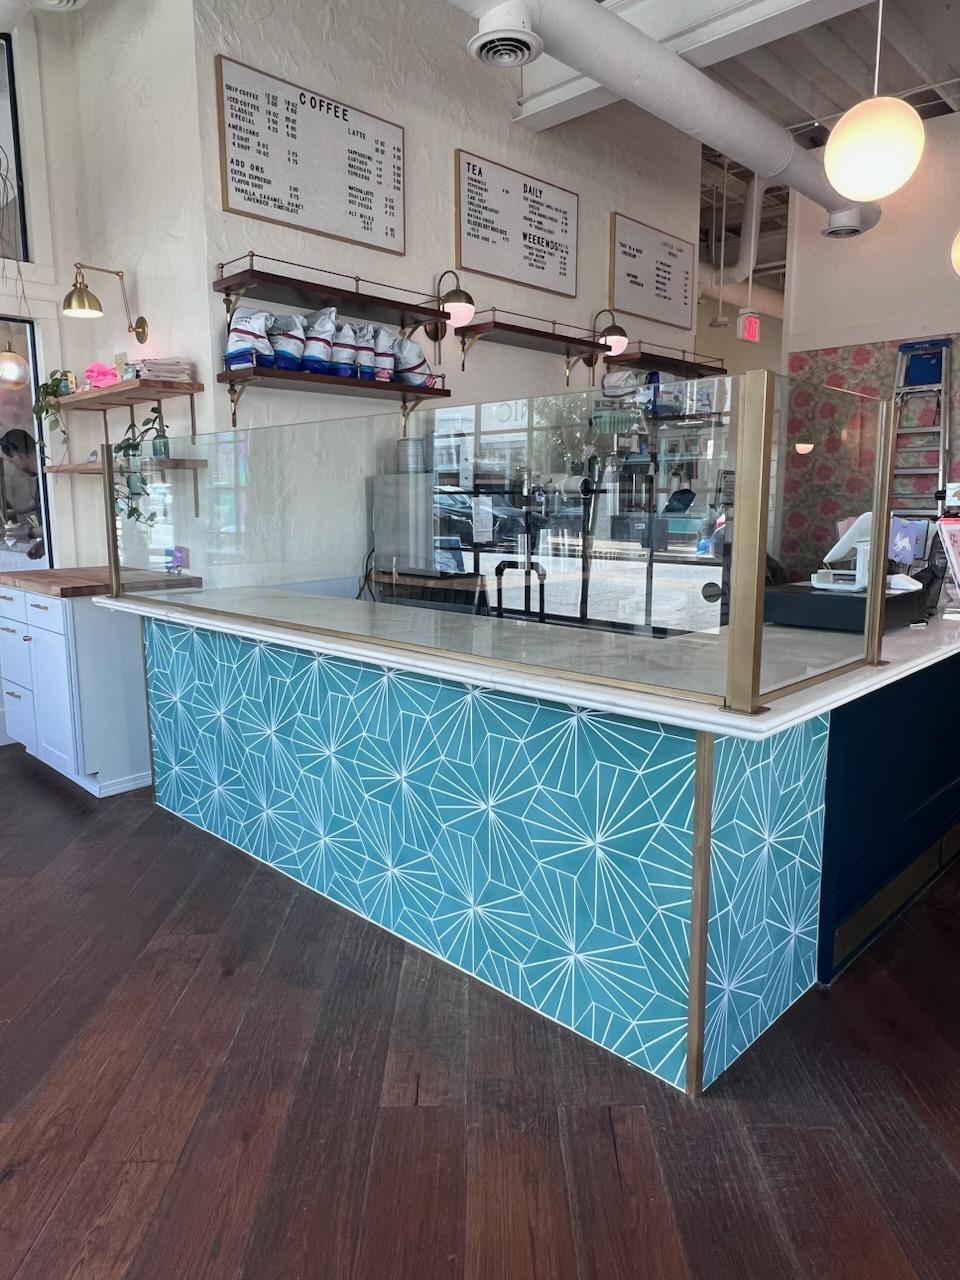 This sneeze guard for The Little Tart Bakery off of Georgia Ave is custom finished with a Spanish Gold powder coat and pencil polished glass for the most food safe, customized, sneeze guard application! These panels also maximize space for the bakery by providing enough room for three sheet pans of their delicious baked goods to lay just behind the glass enclosure.